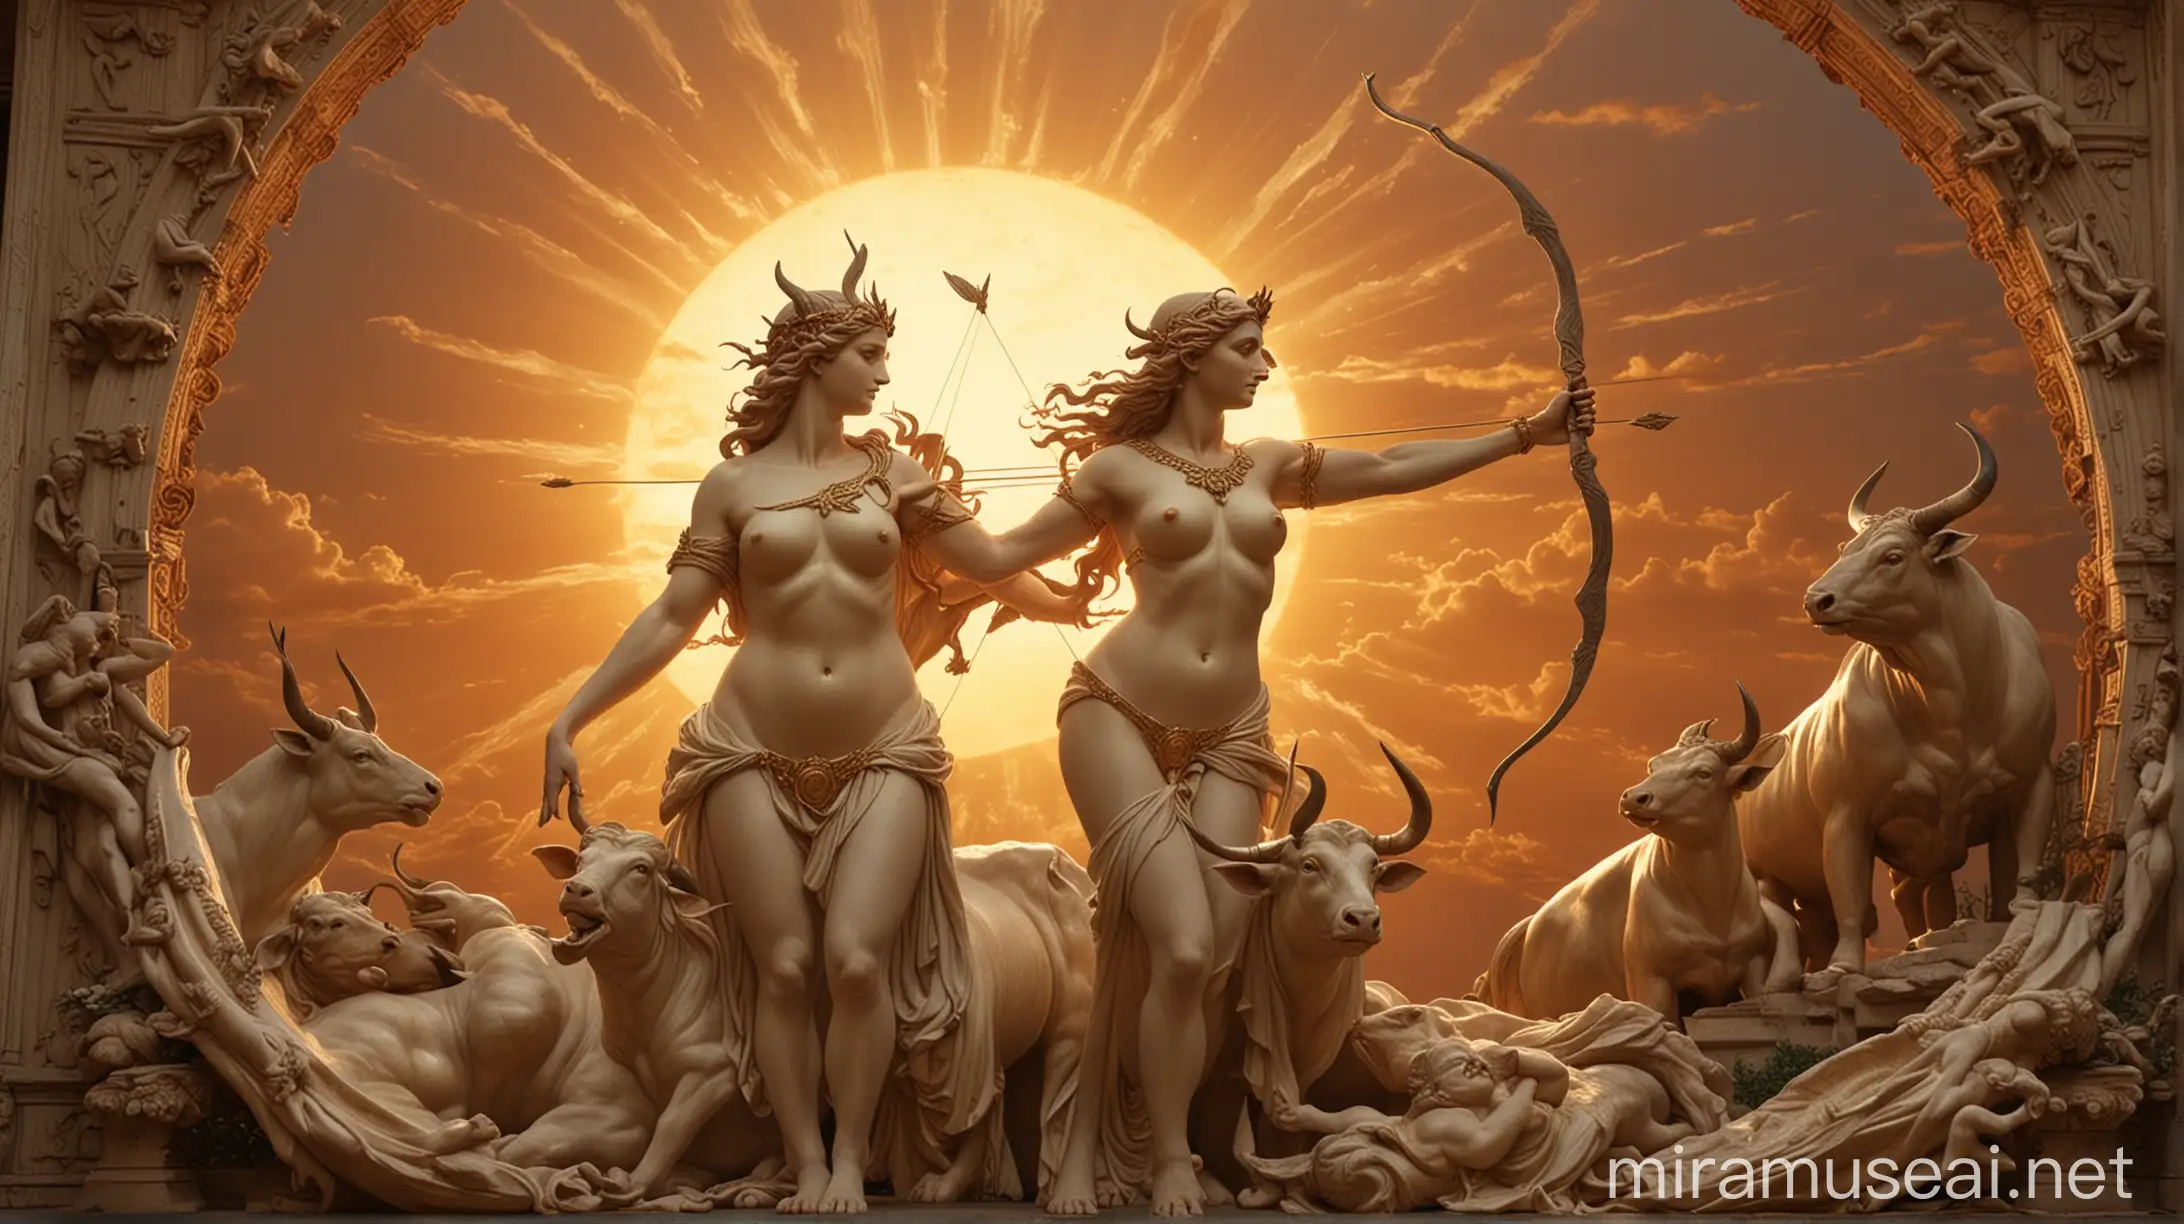 Radiant Sun with Bull Aphrodite and Artemis in Antique Setting